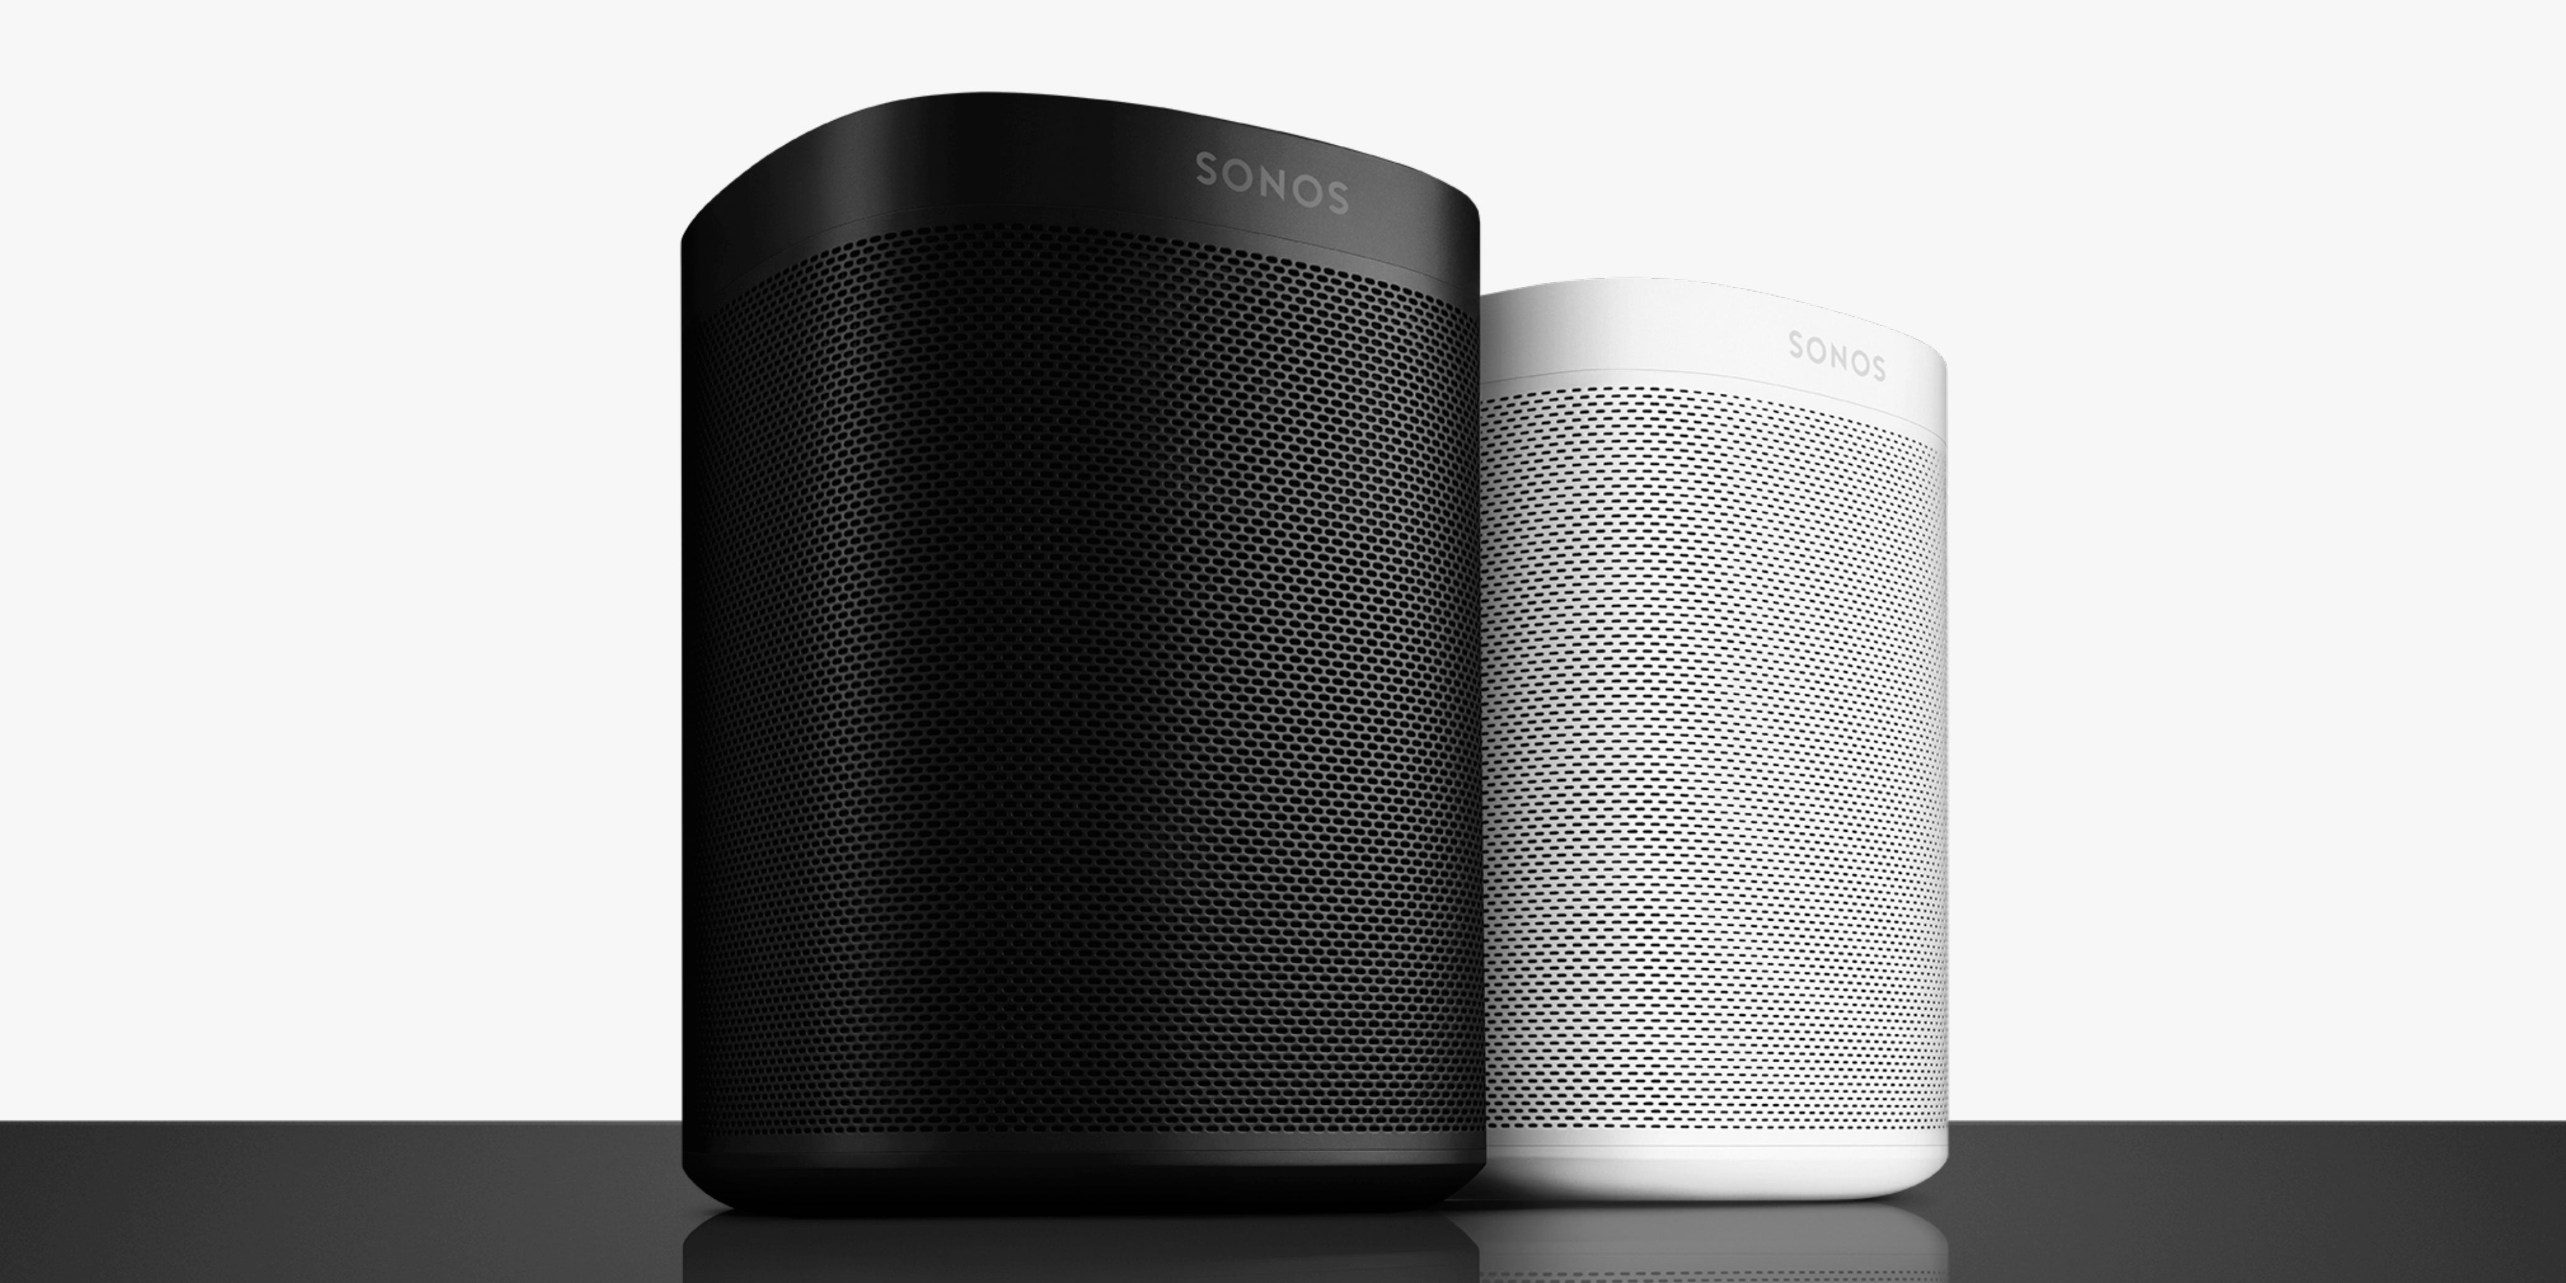 https://9to5mac.com/wp-content/uploads/sites/6/2019/04/sonos-one-both-colors.jpg?quality=82&strip=all